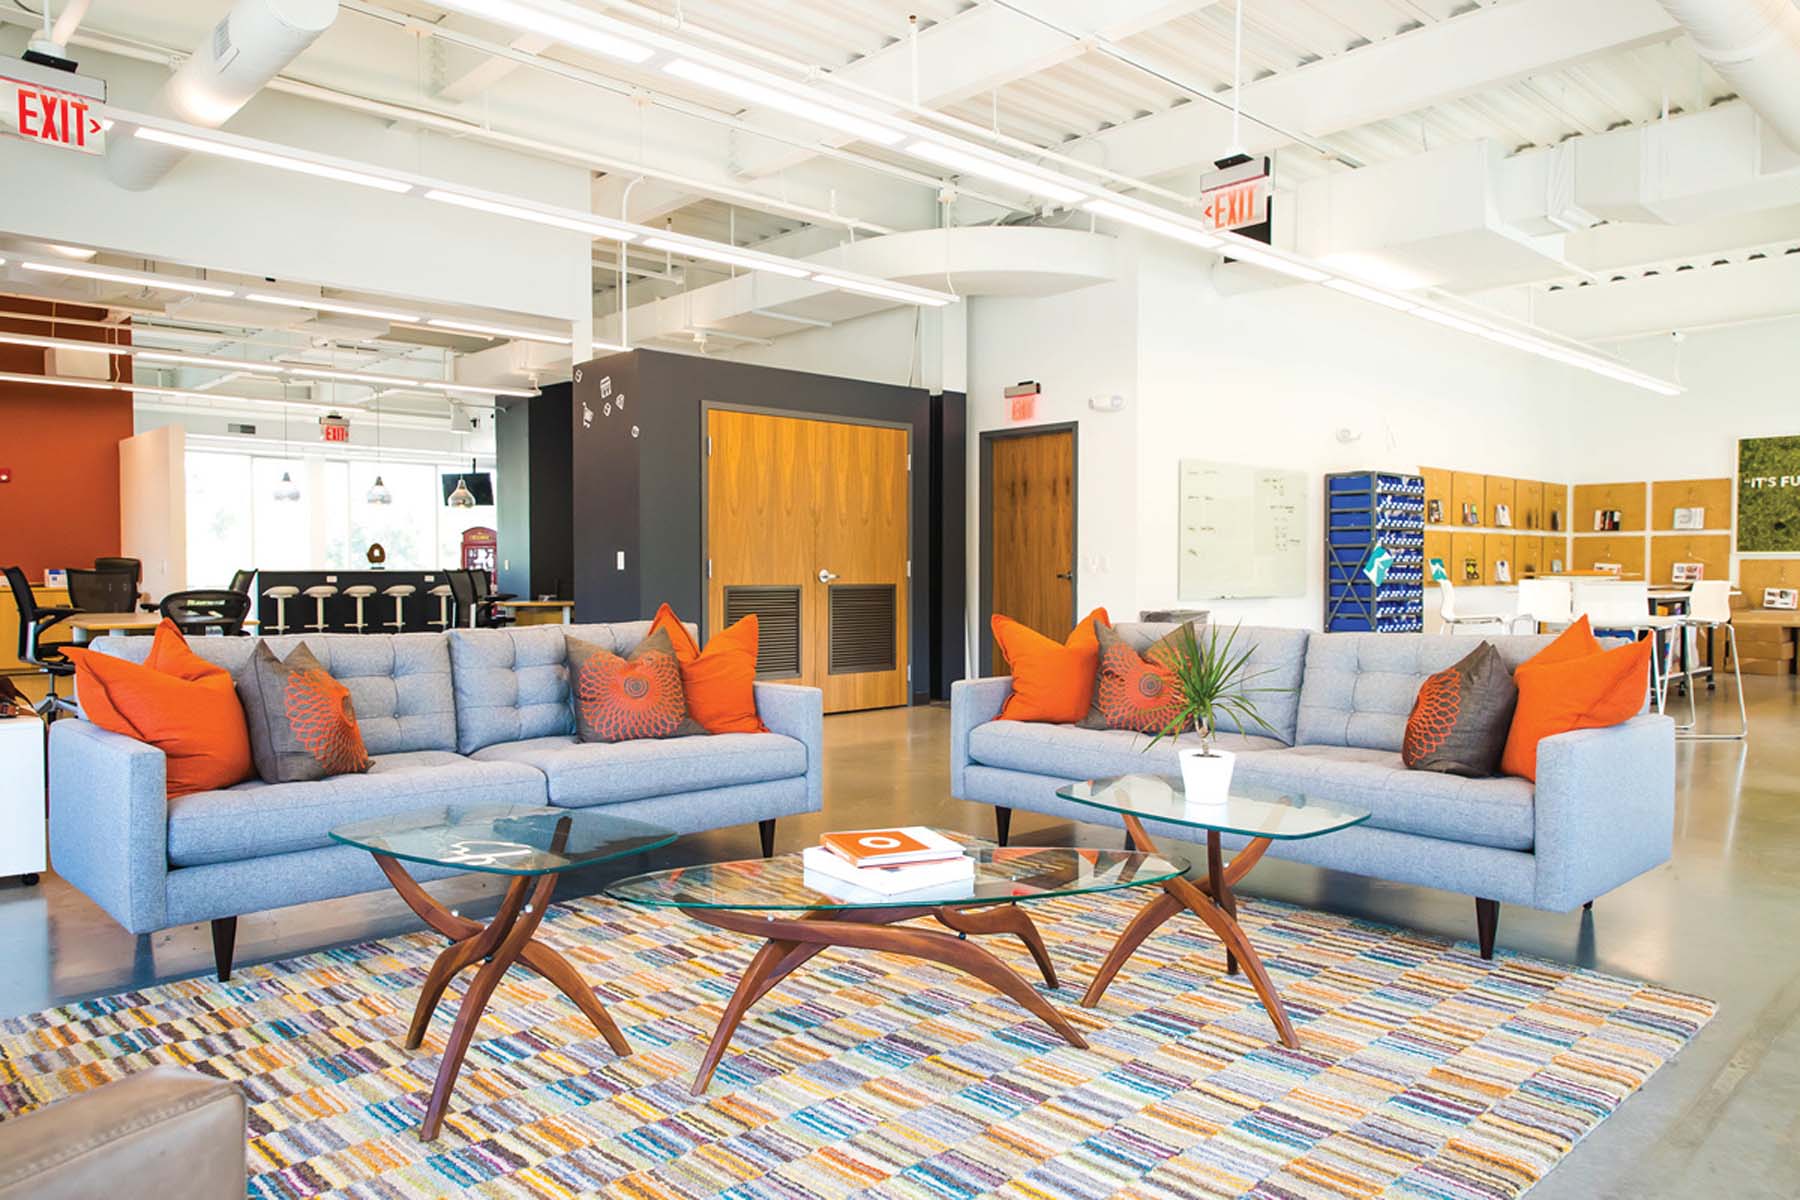 Collaborative workspace with two blue couches and orange accent pillows